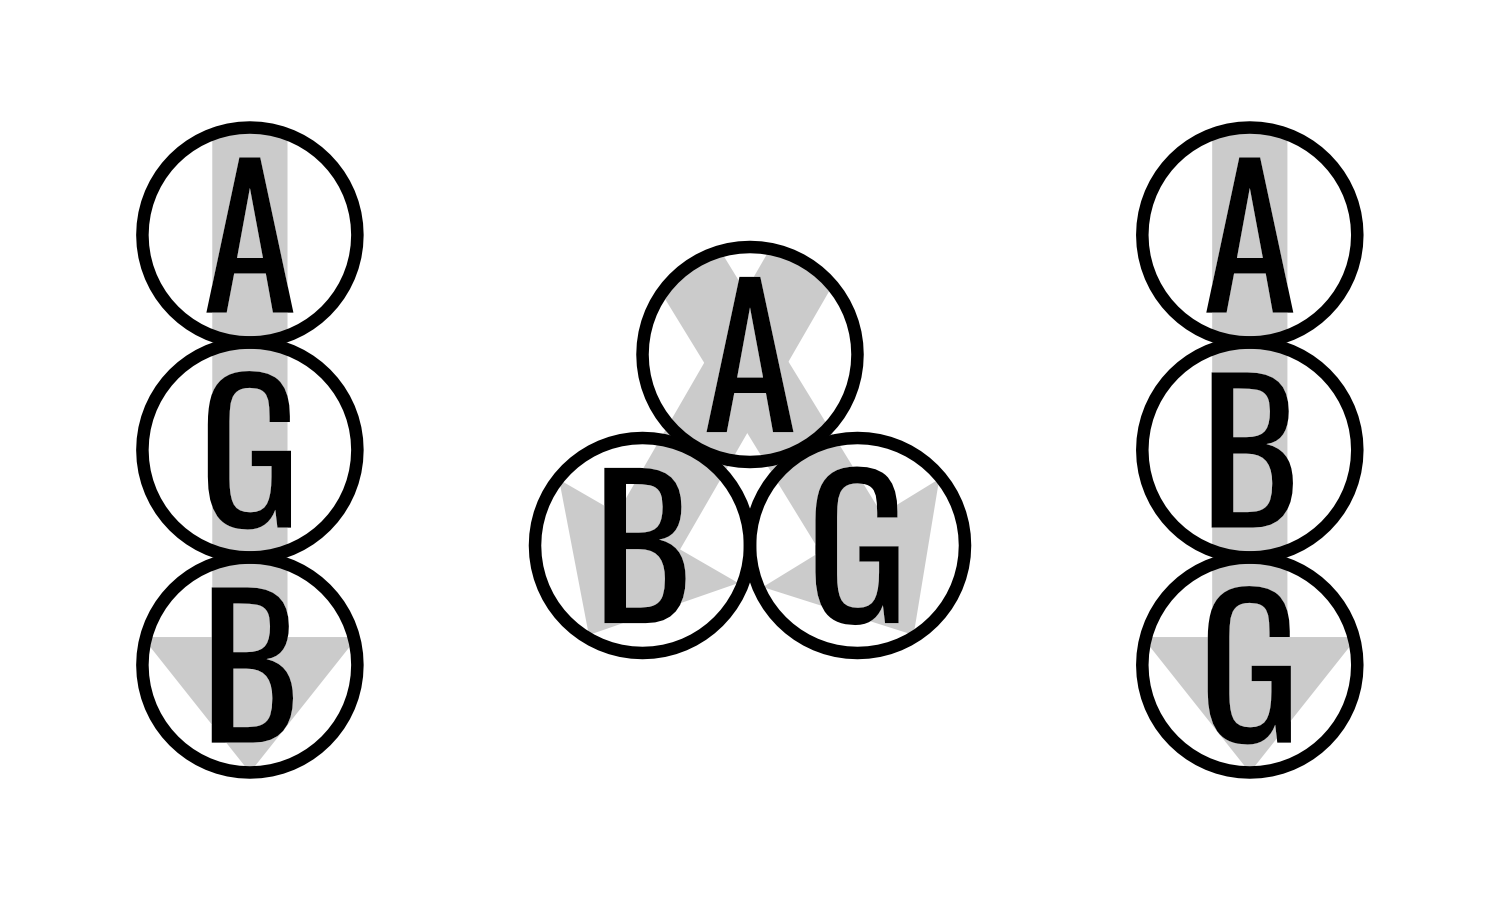 Three possible relations of an action (A) which has a good (G) and bad effect (B). The second principle of the doctrine of double effect allows for the first two relations, but not the third, where the good effect comes about as a result of bad effect.